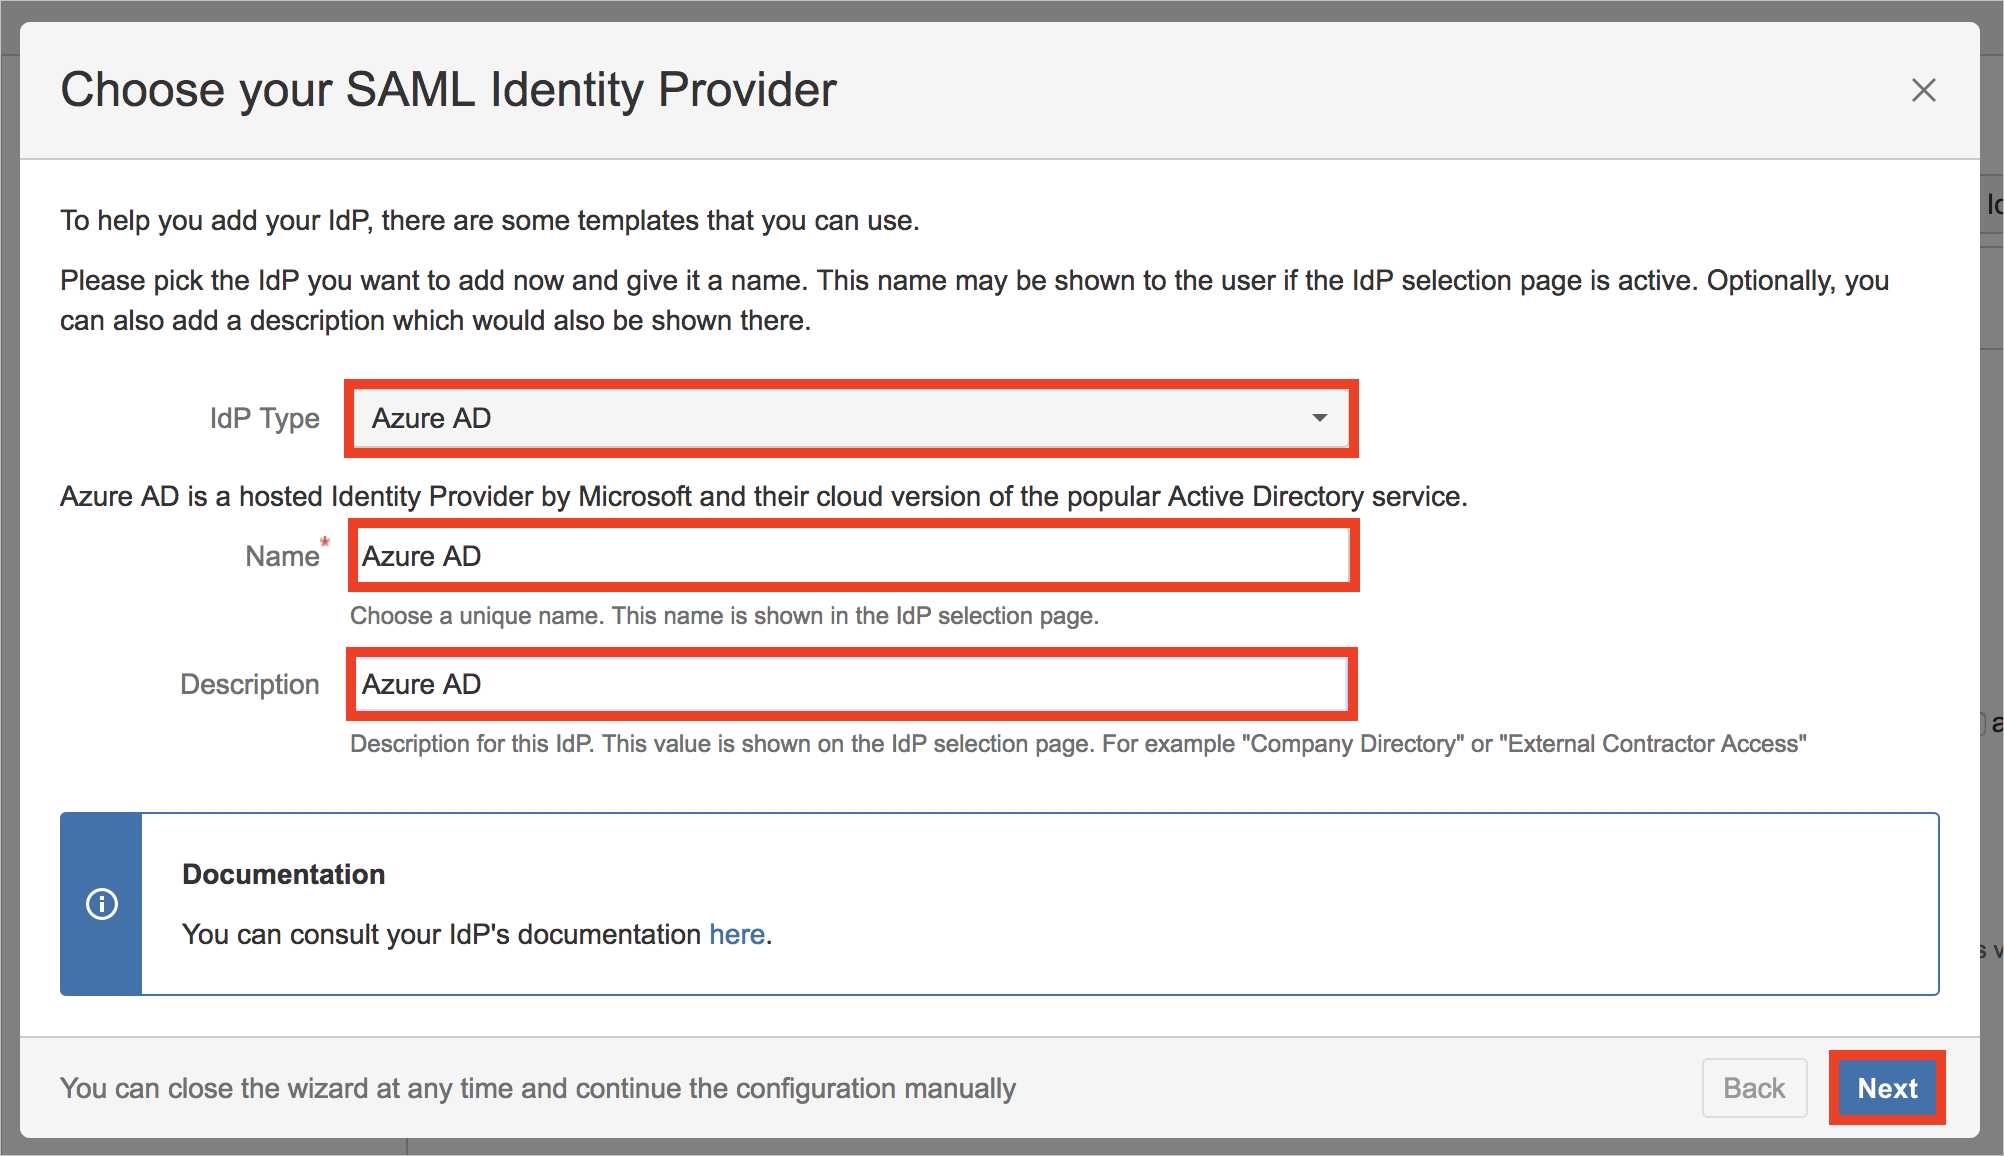 Screenshot that shows the "Choose your S A M L Identity Provider" page with the "I d P Type", "Name", and "Description" text boxes highlighted.